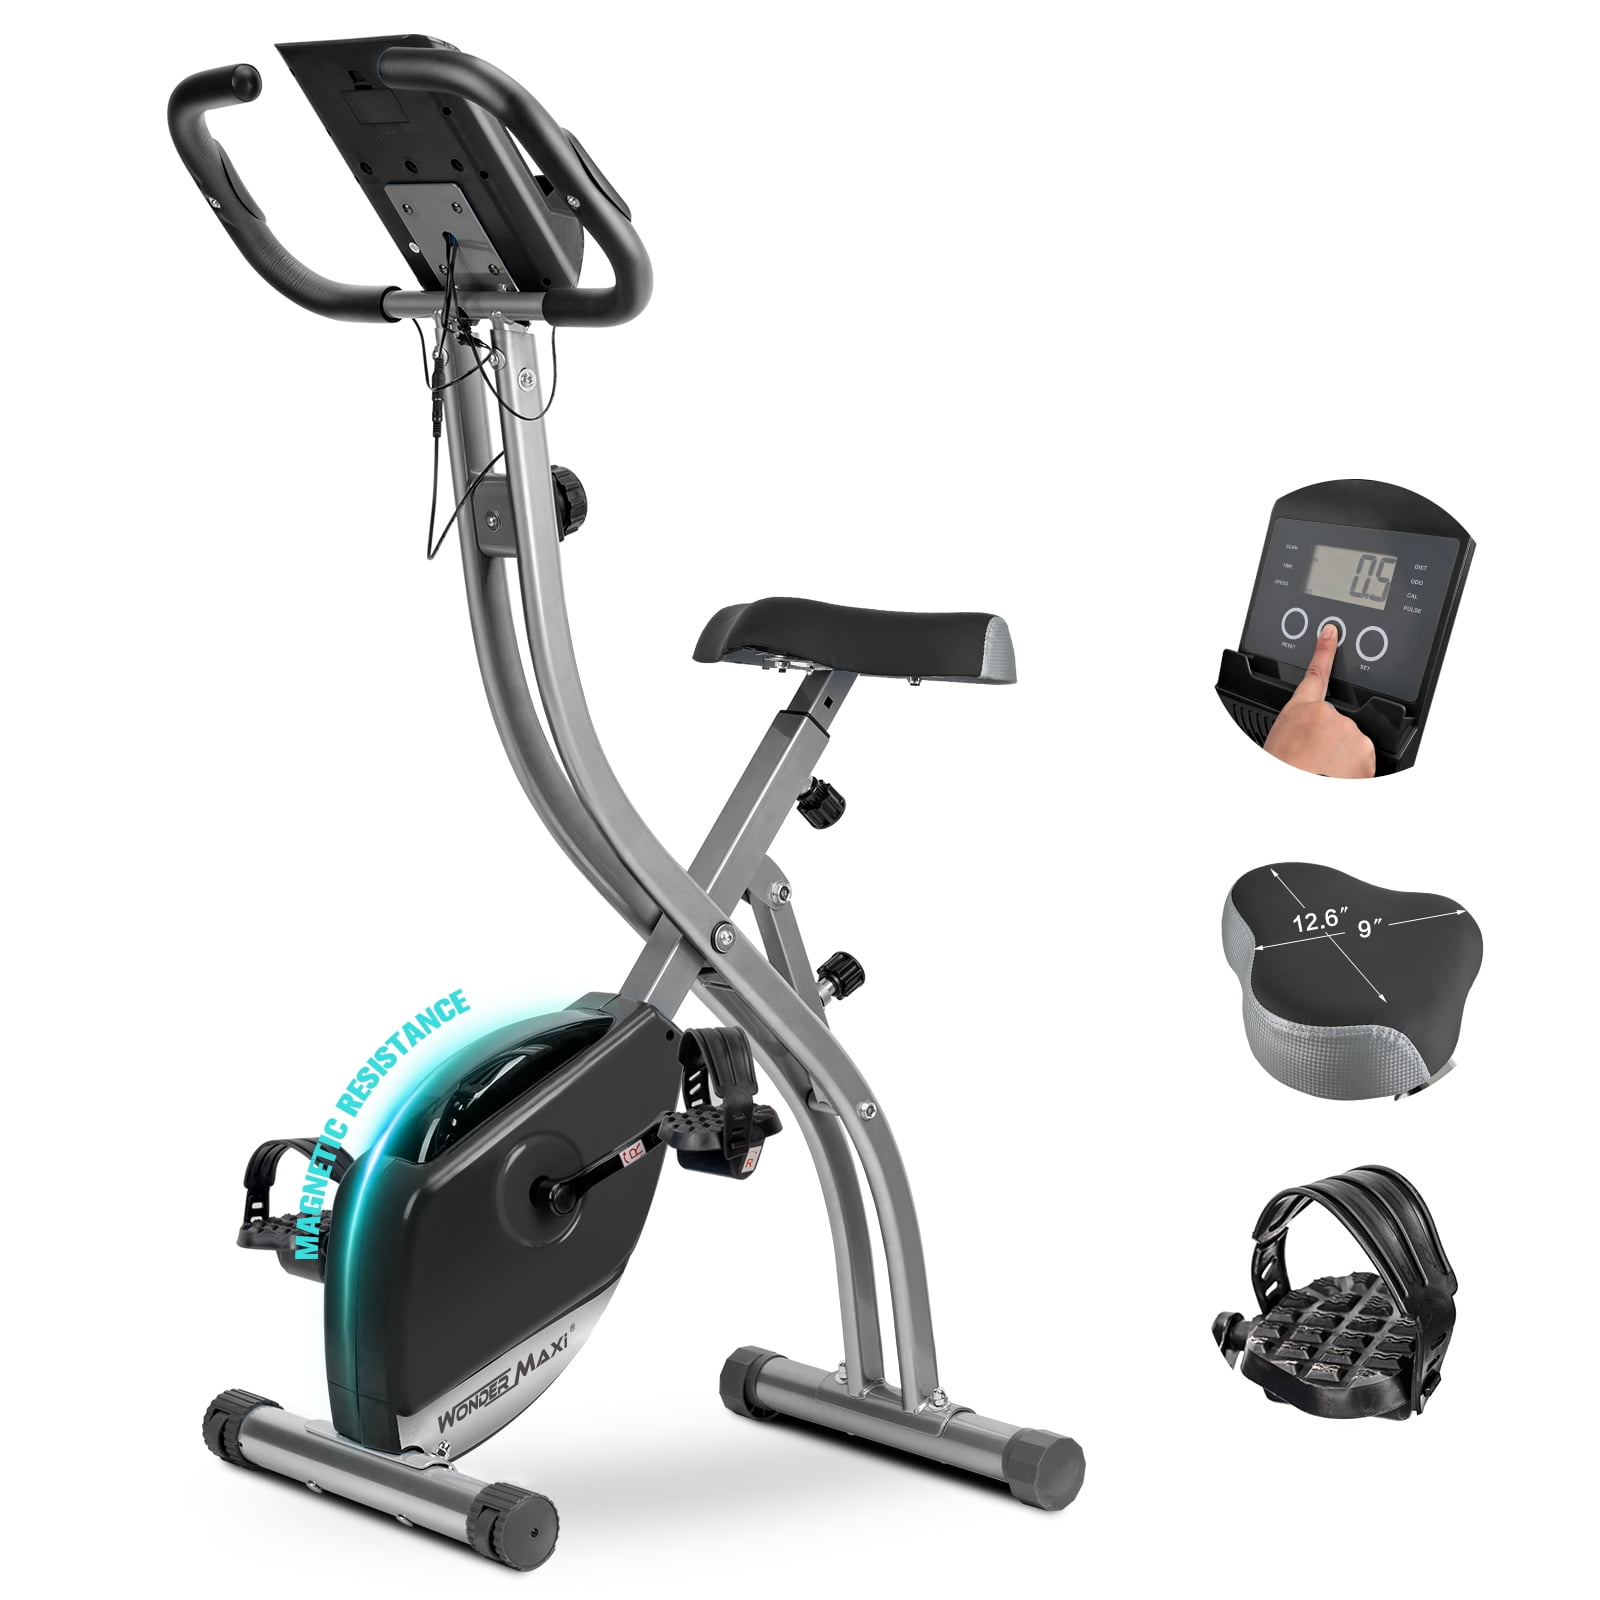 Details about   Indoor Cycling Bike Magnetic Upright Cardio Workout Stationary Exercise Bike New 